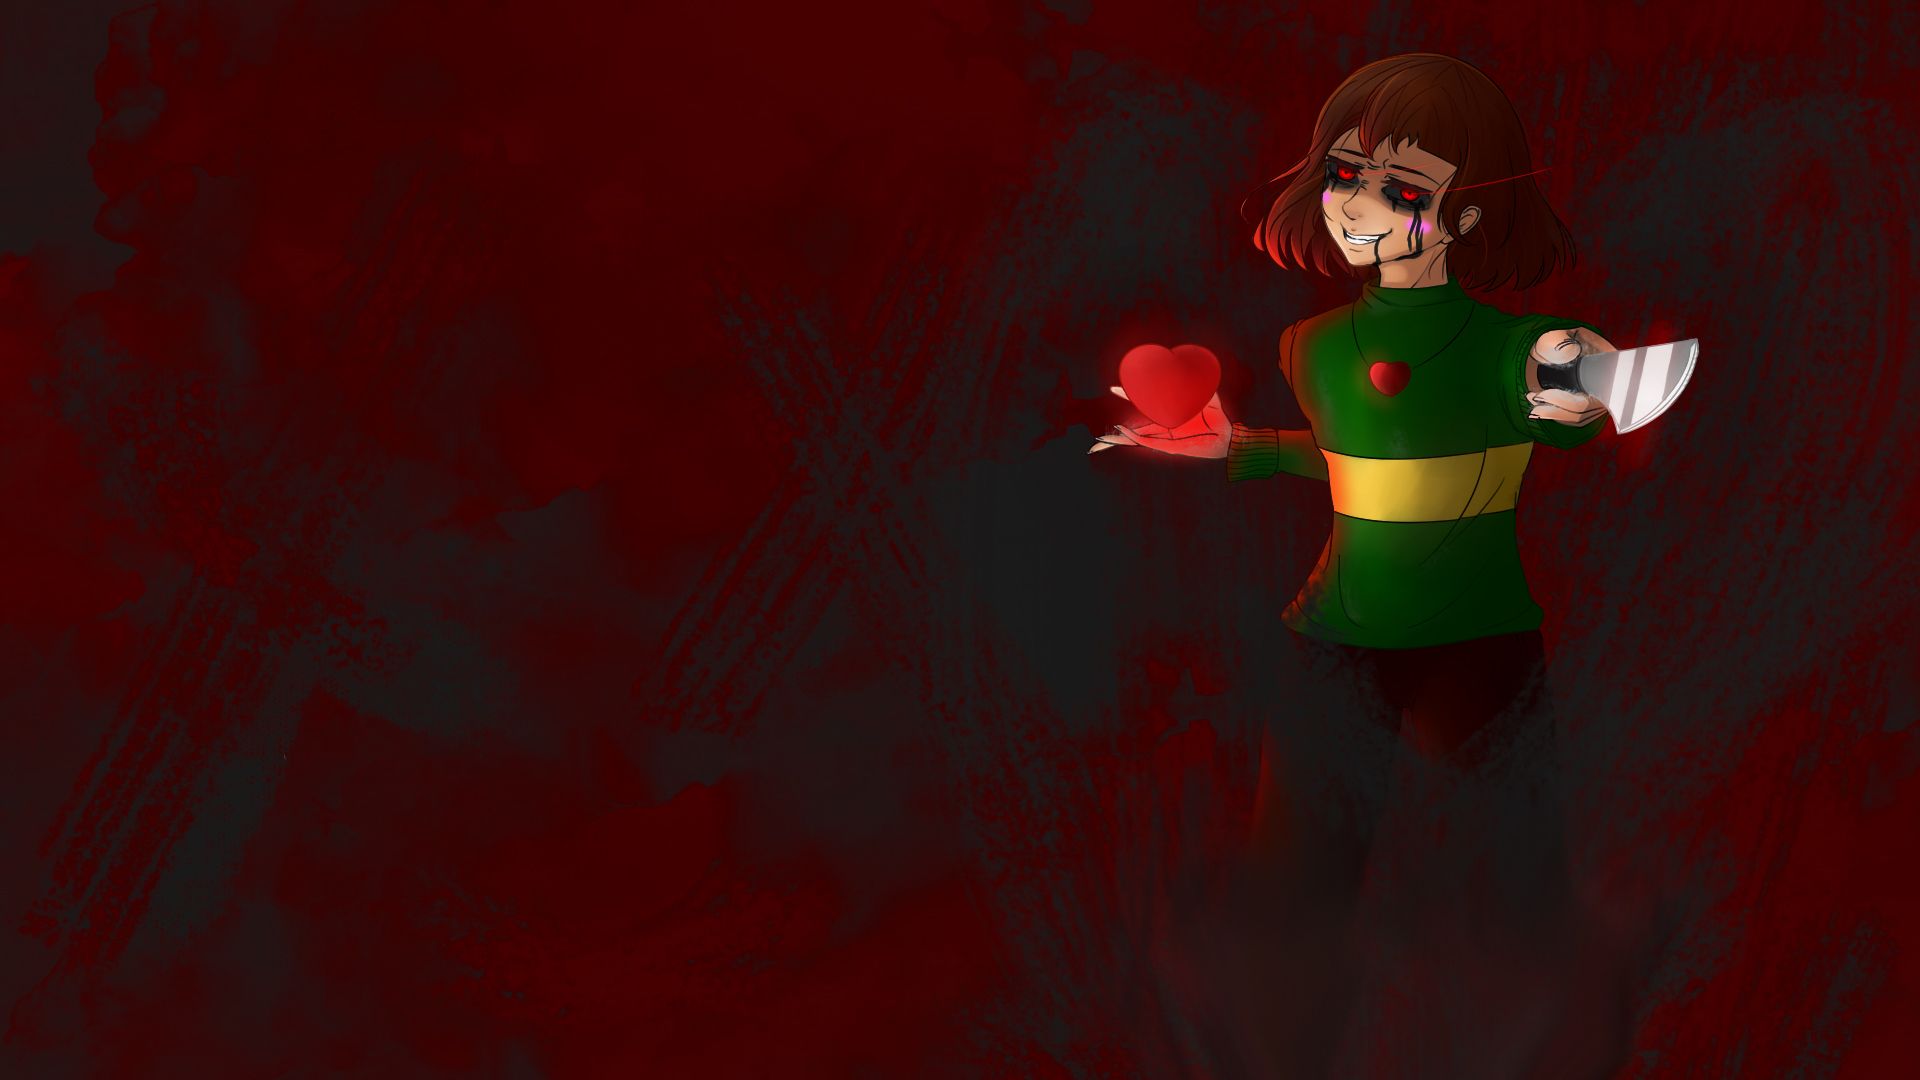 Free download Chara The World is Ending Undertale Wallpaper by DigitalColdI on [1920x1080] for your Desktop, Mobile & Tablet. Explore Undertale Chara Wallpaper. Cool Undertale Wallpaper, Undertale Wallpaper for